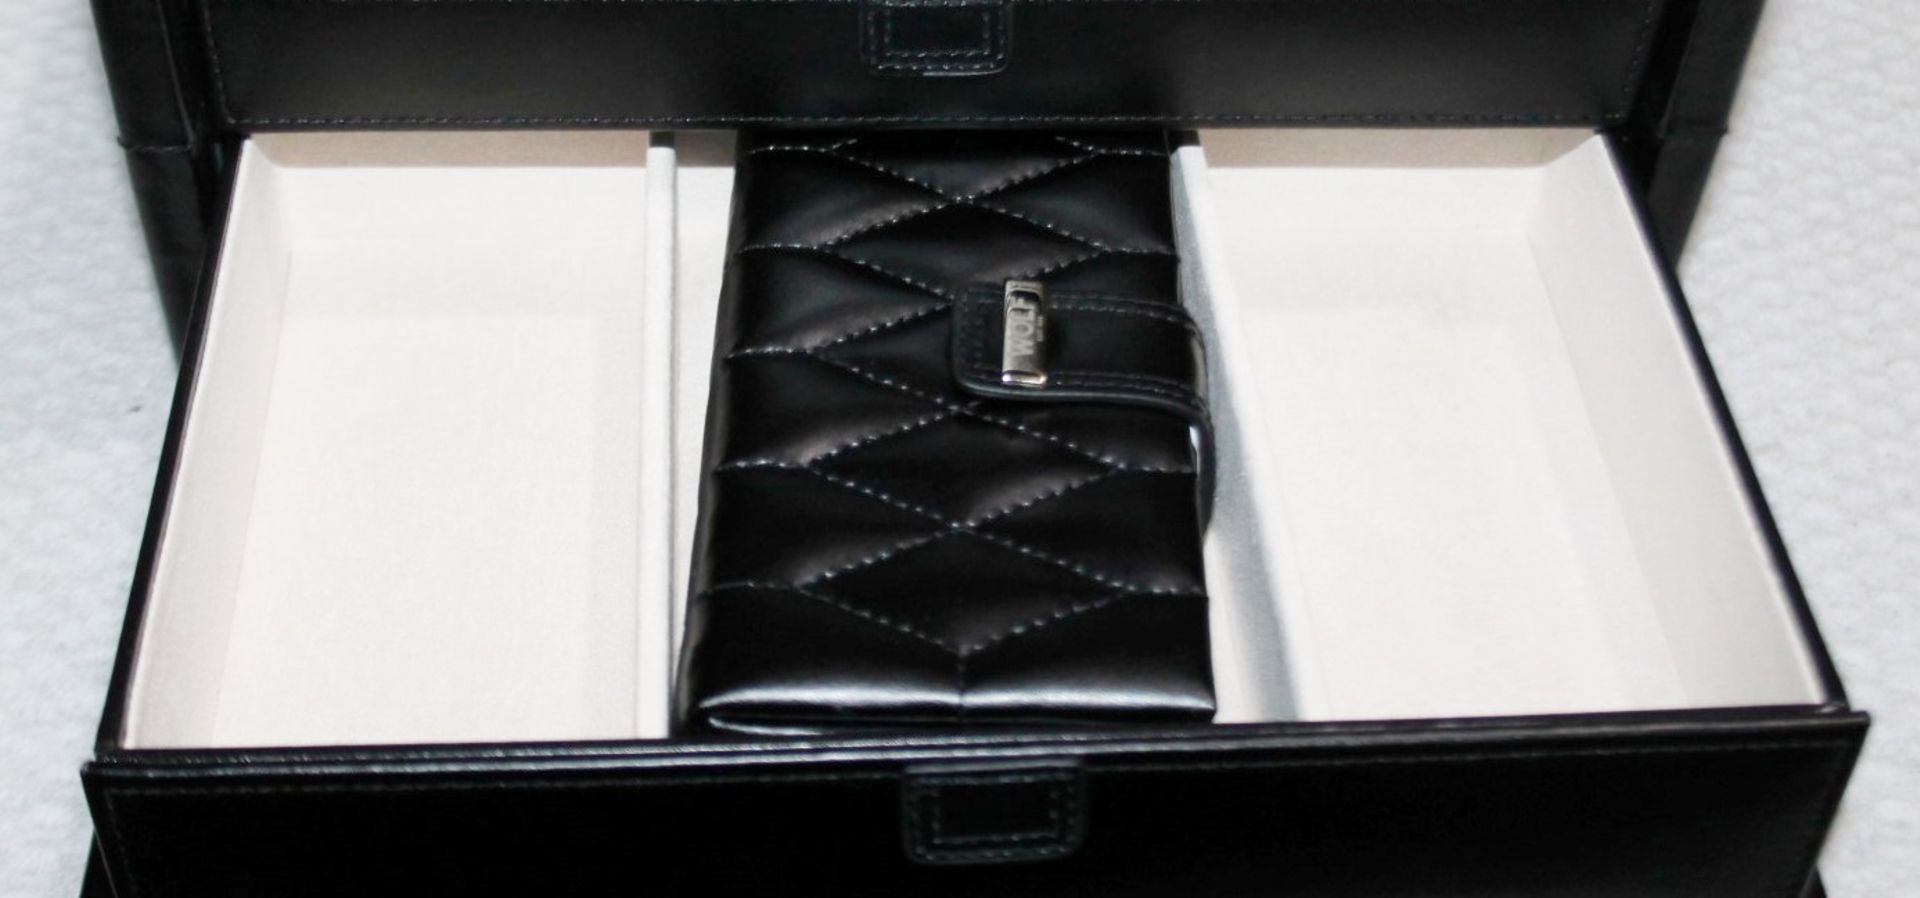 1 x WOLF 'Caroline' Jewellery Box Handcrafted Black Leather, With Travel Case - Original Price £241 - Image 10 of 17